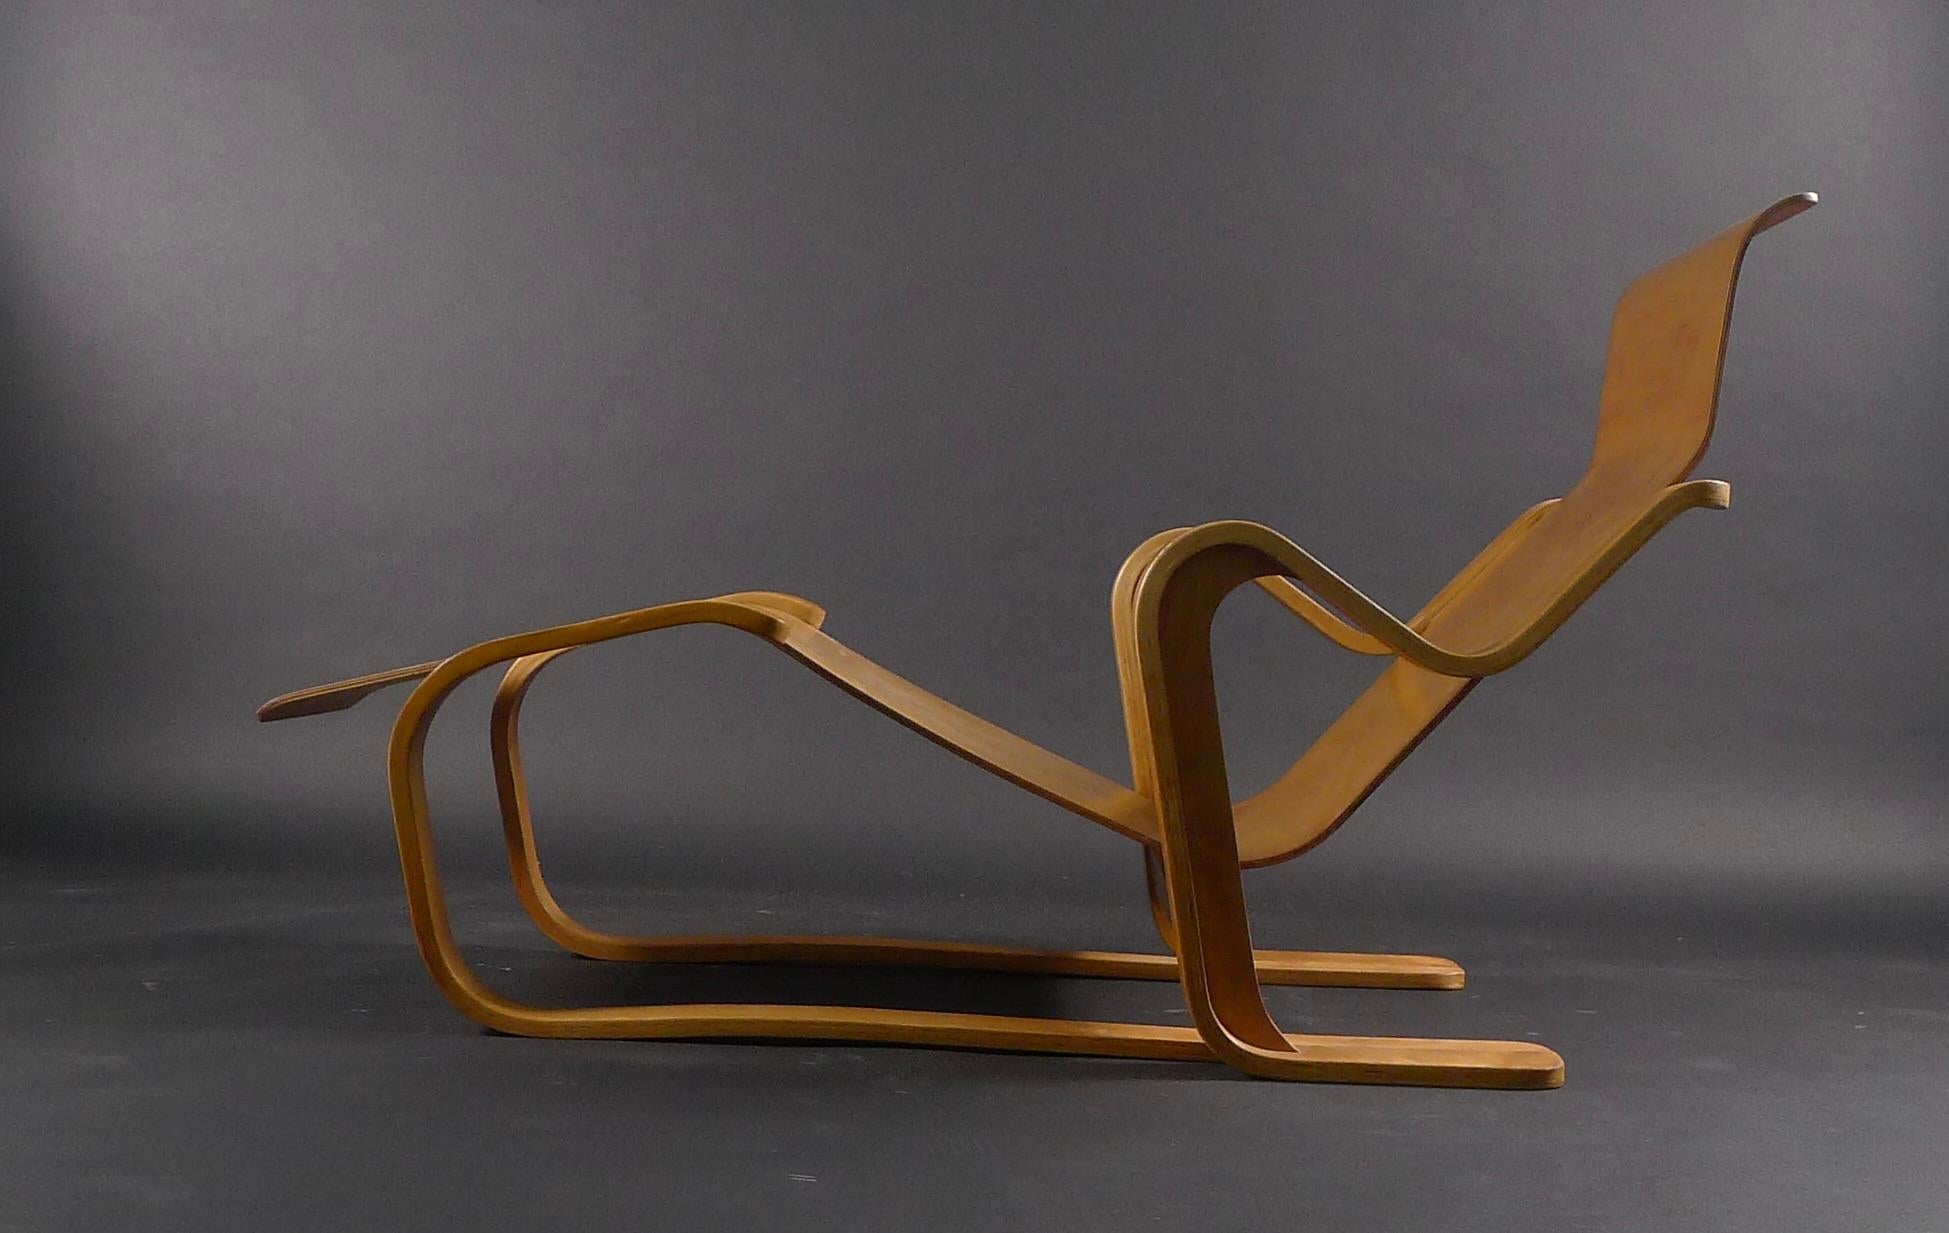 Marcel Breuer (1902 - 1981), Long Chair, designed 1935-1936, in laminated birch plywood

This is an early example of the model produced by Isokon Furniture Company Ltd, London. Later versions are covered, but the early editions were completely